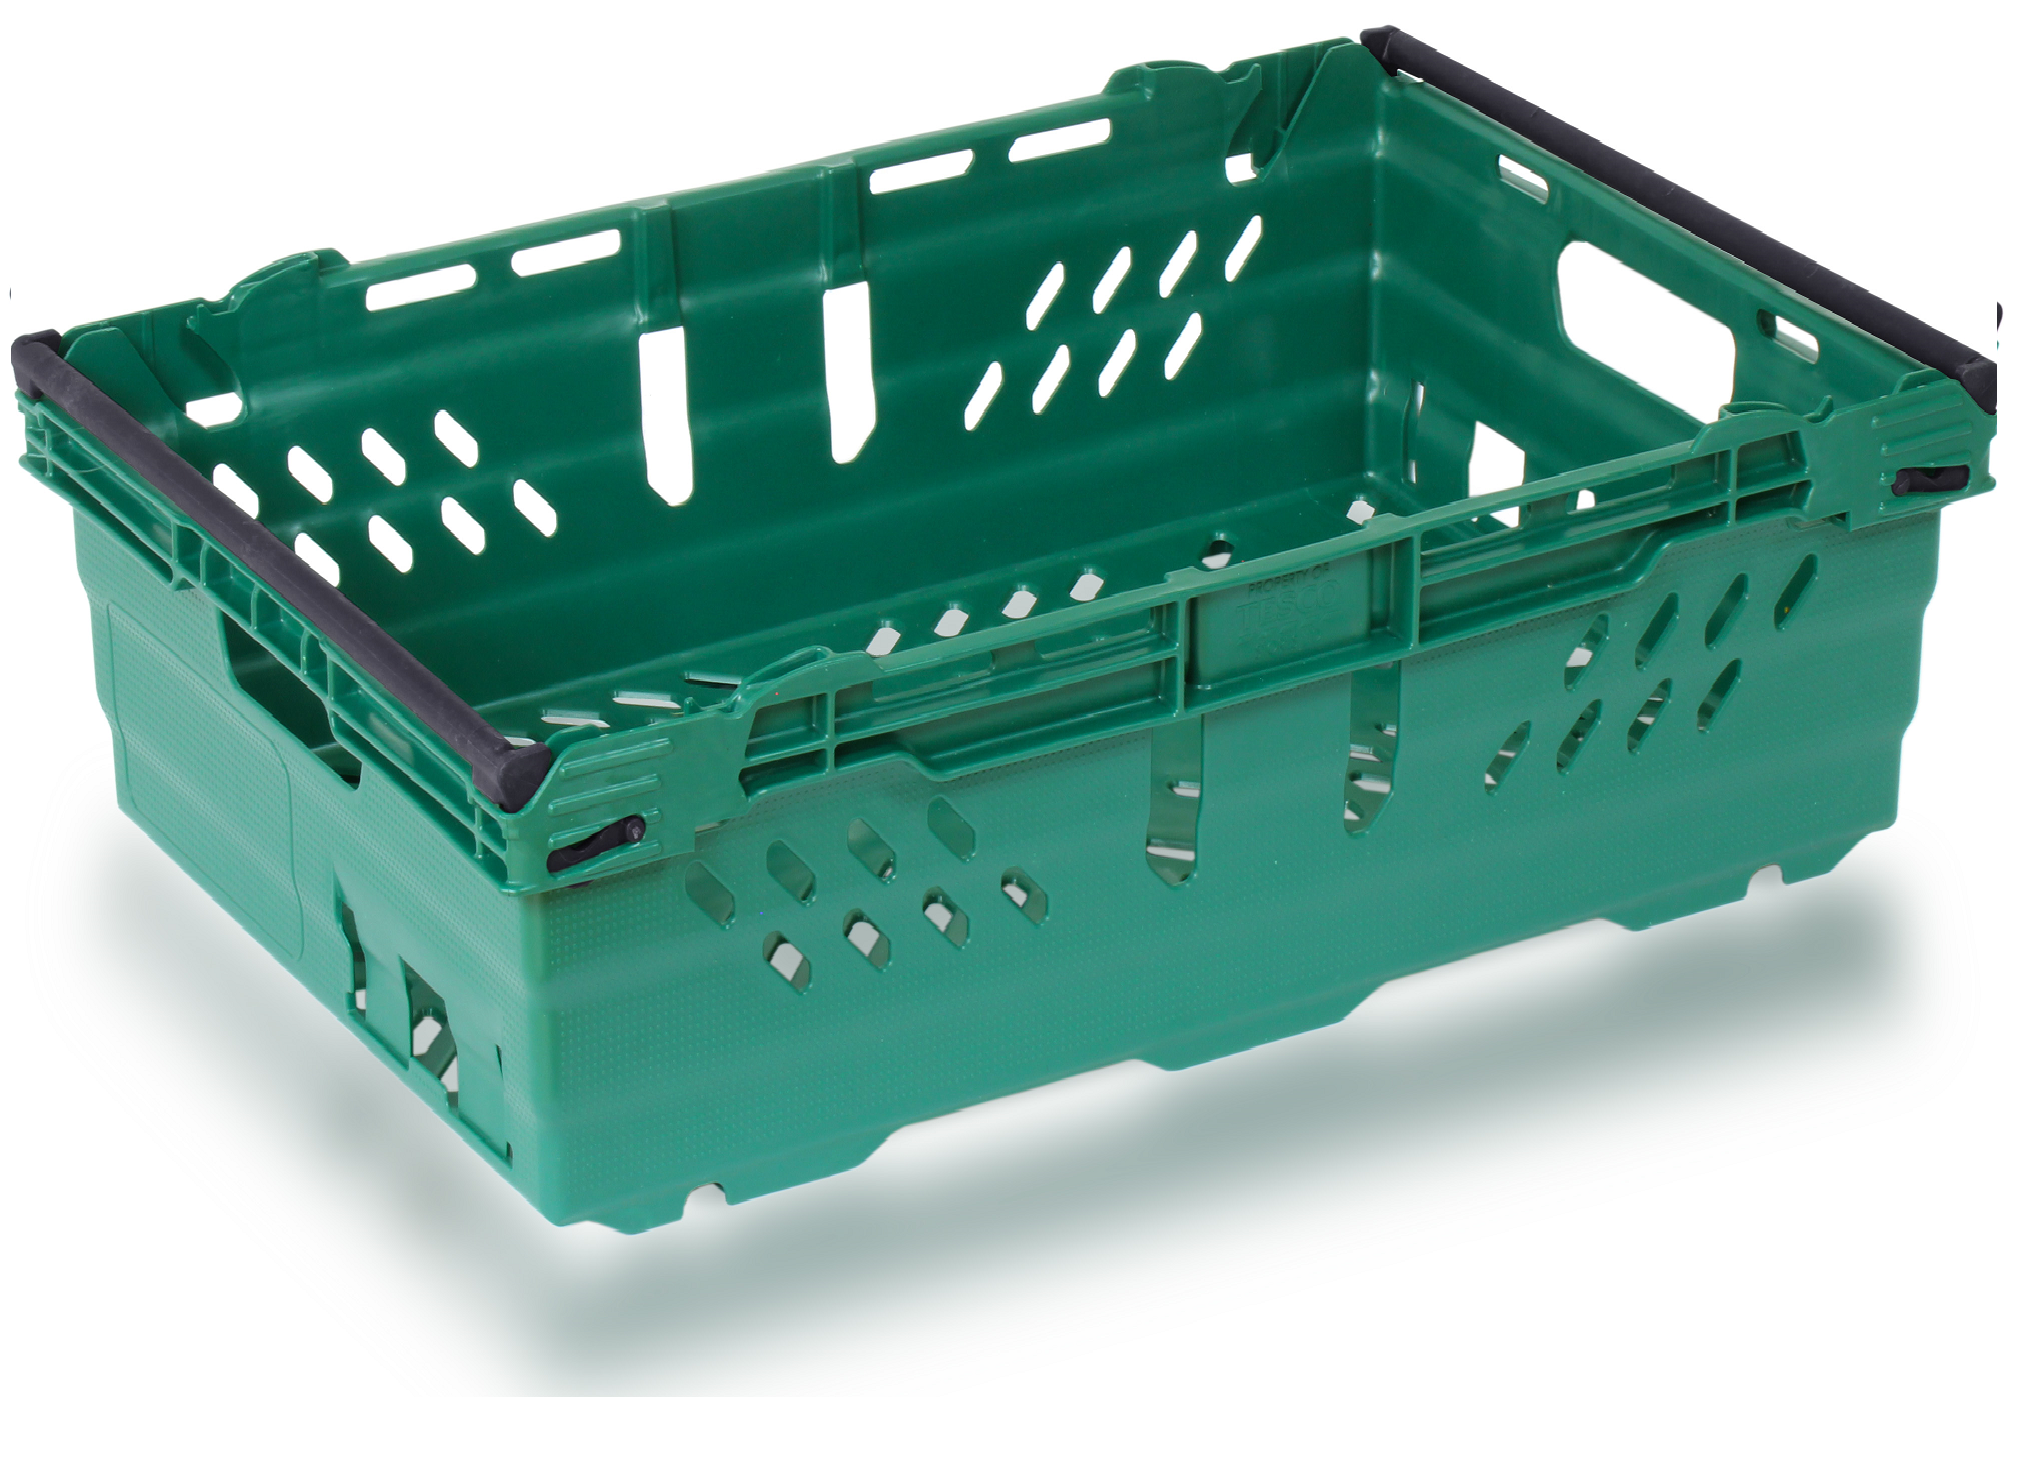 UK Suppliers Of 600x400x100 Bale Arm Crate 16 Ltr - Pack of 14 For Transportation